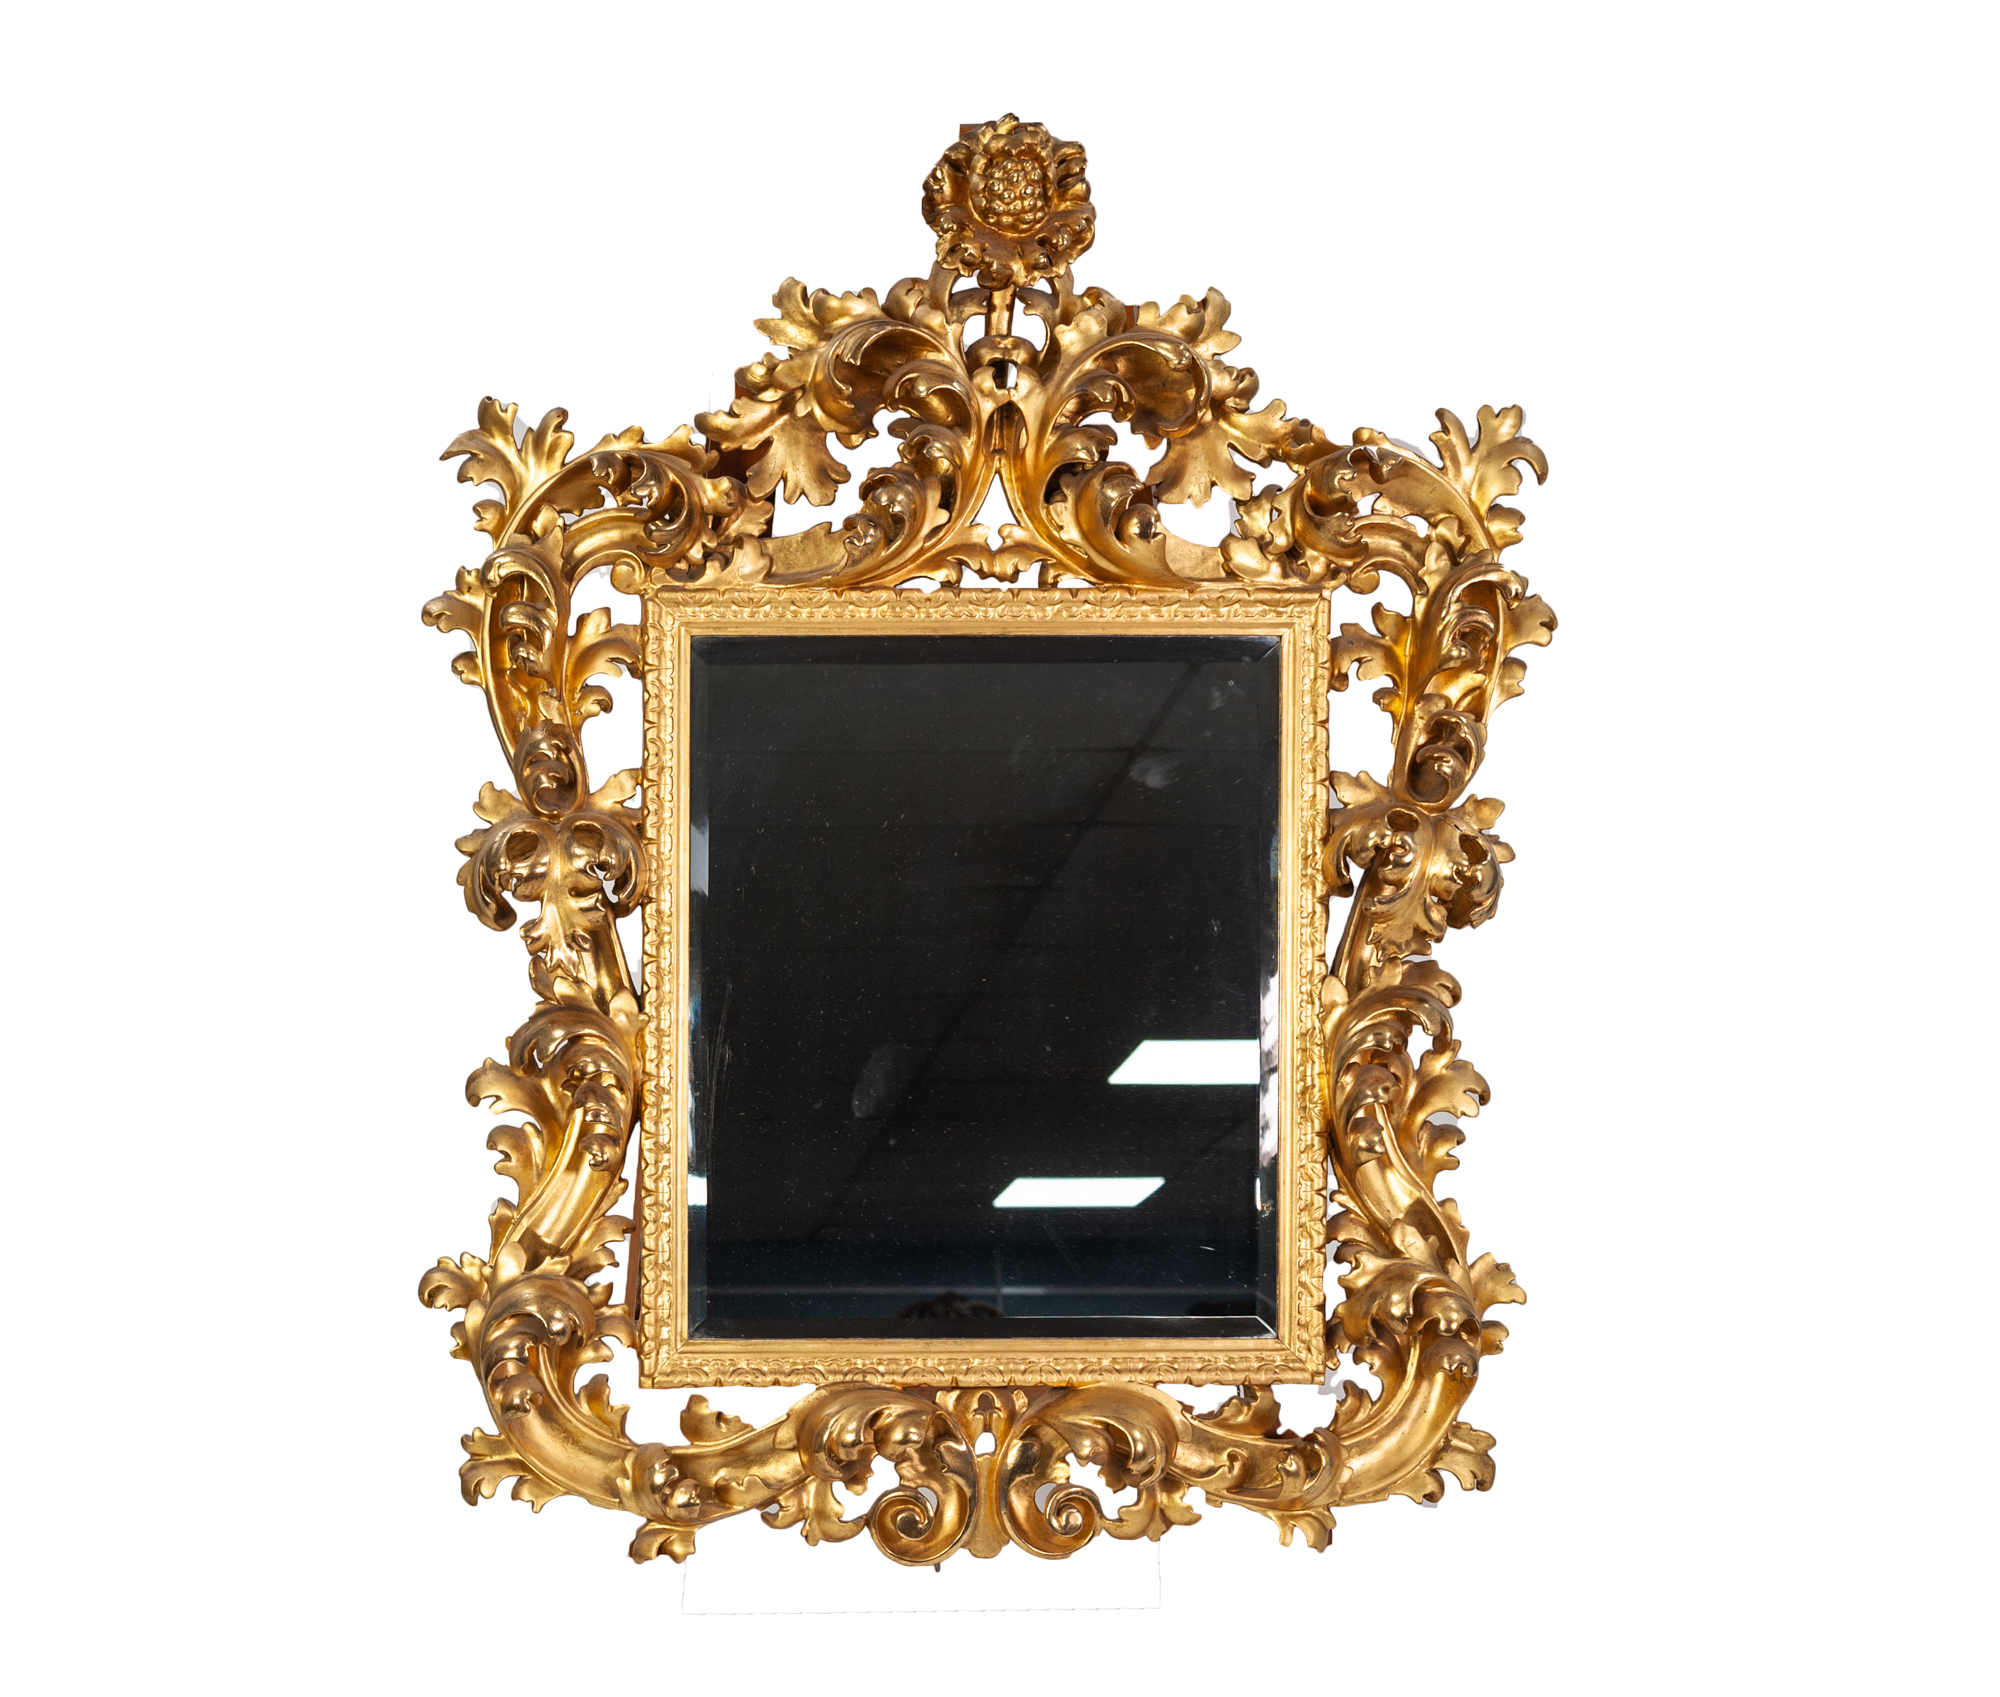 LATE NINETEENTH/ EARLY TWENTIETH CENTURY FLORENTINE STYLE CARVED GILTWOOD WALL MIRROR